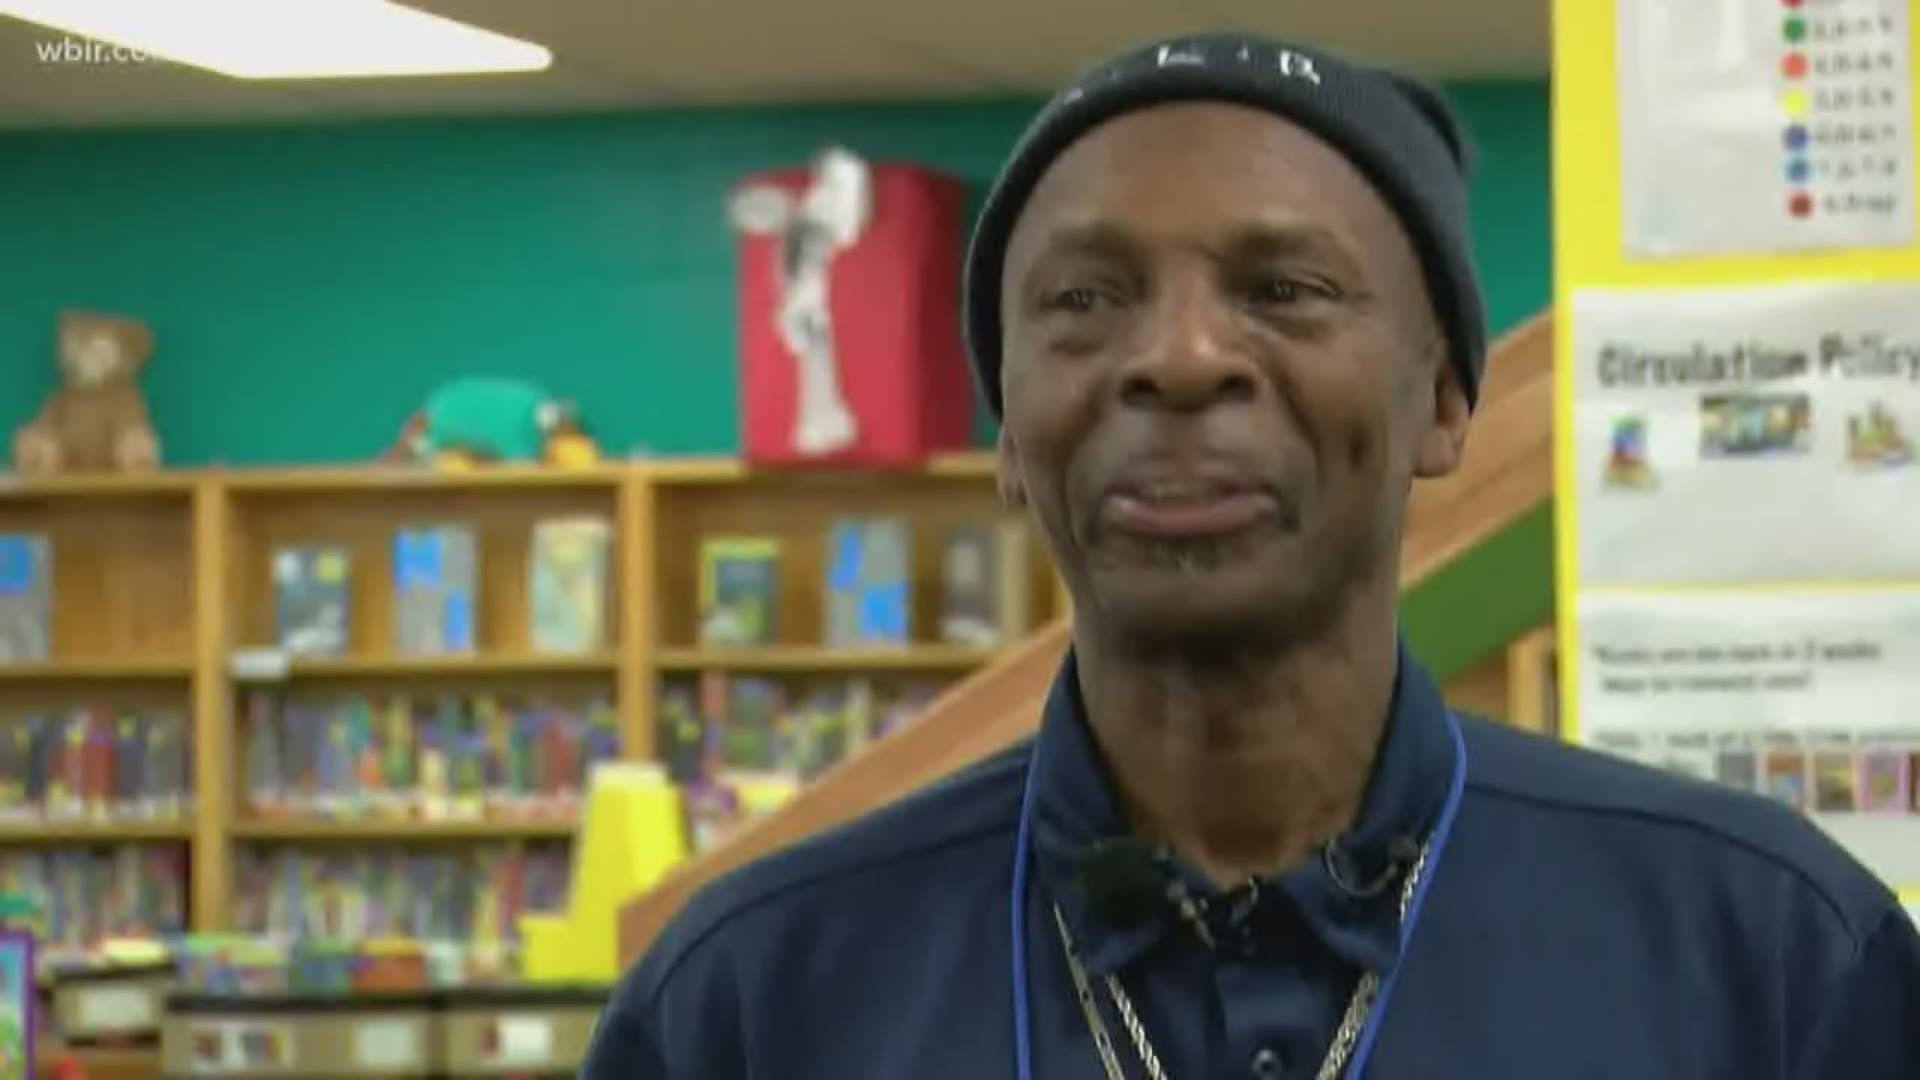 An elementary school in the Memphis area is raising money to buy a car for its custodian.